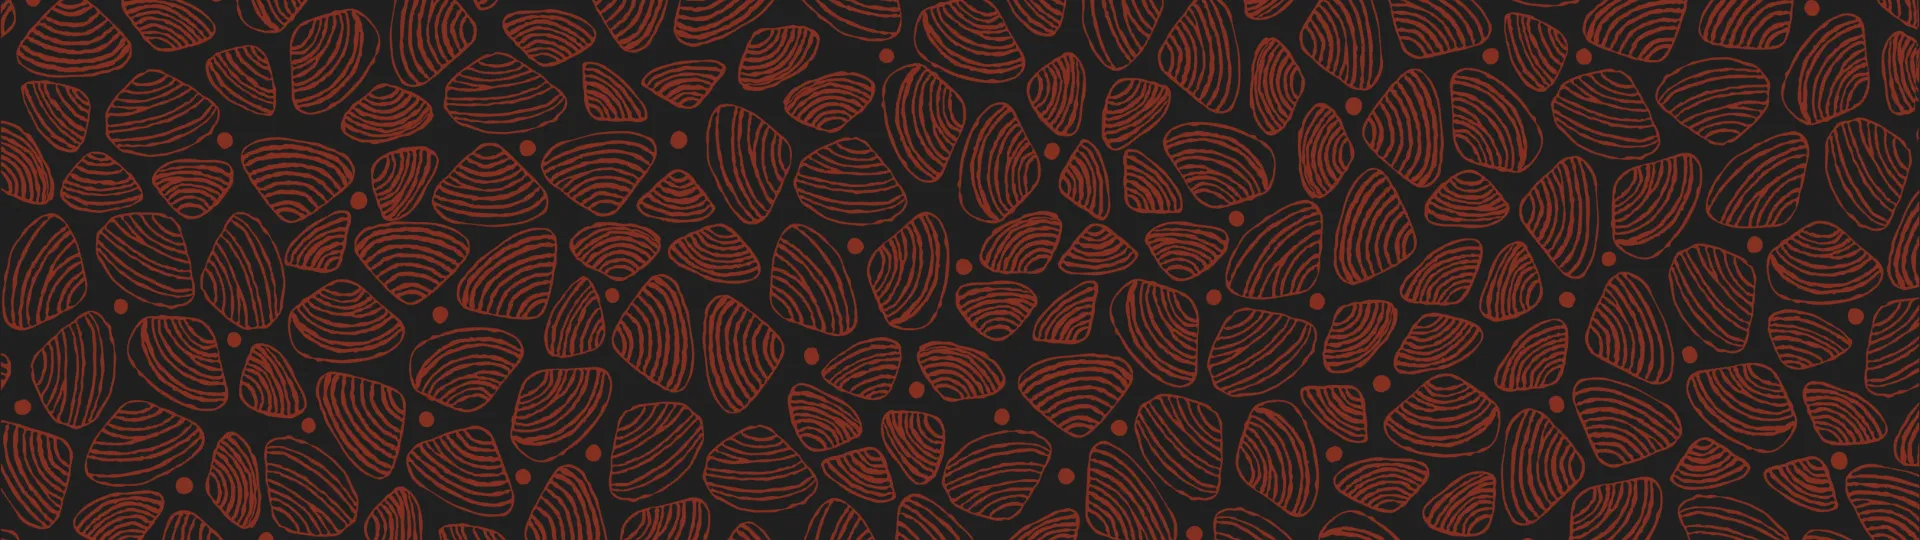 Decorative banner of Red Shells